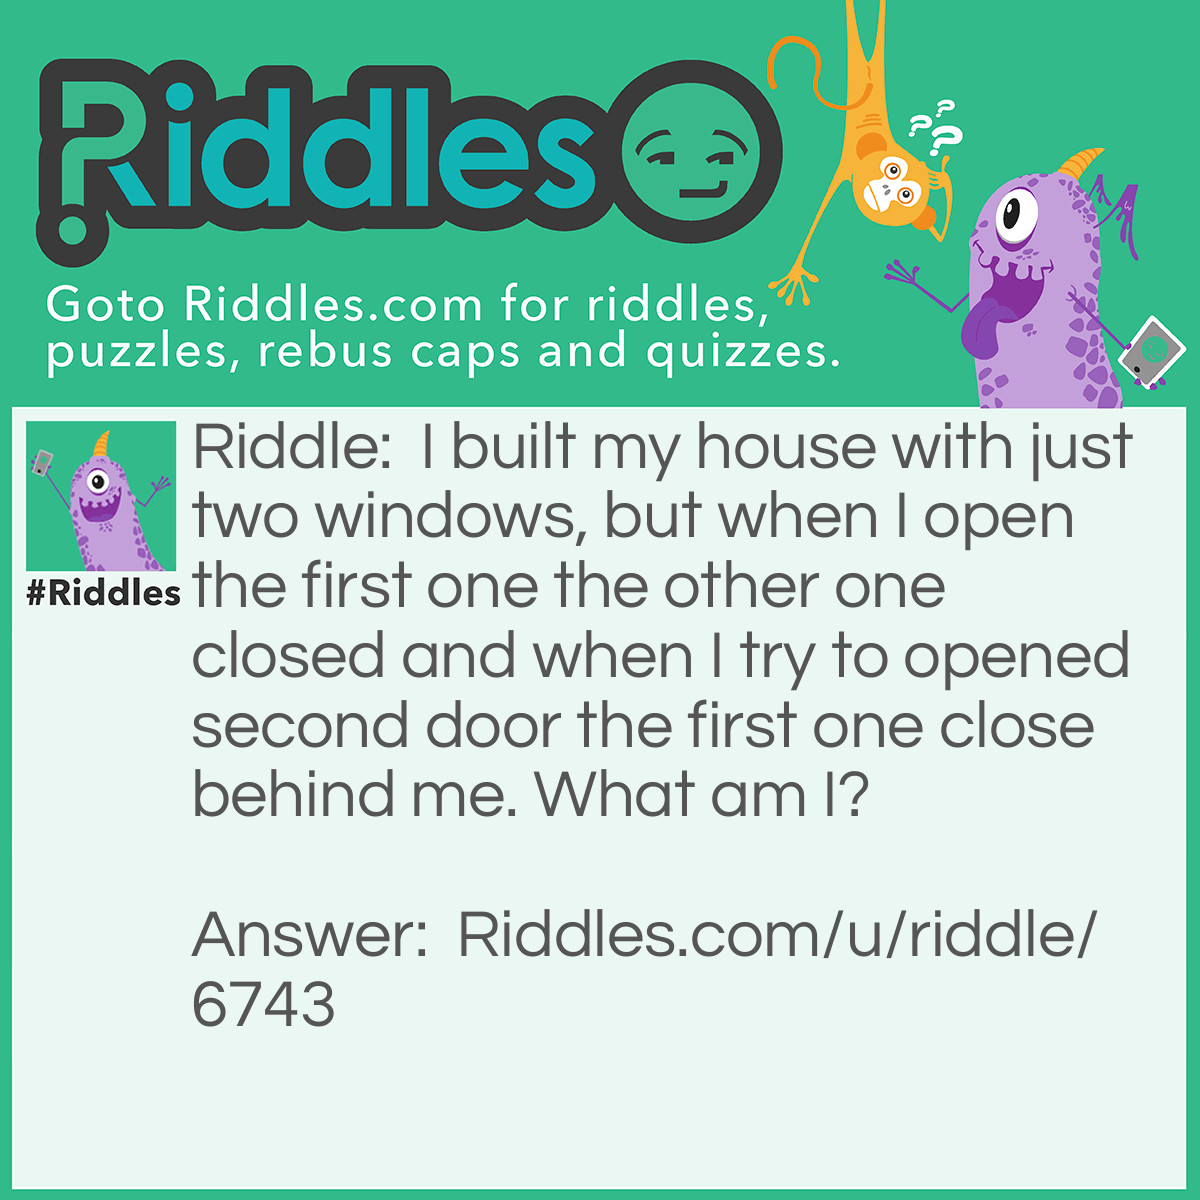 Riddle: I built my house with just two windows, but when I open the first one the other one closed and when I try to opened second door the first one close behind me. What am I? Answer: I'm just a matches box.